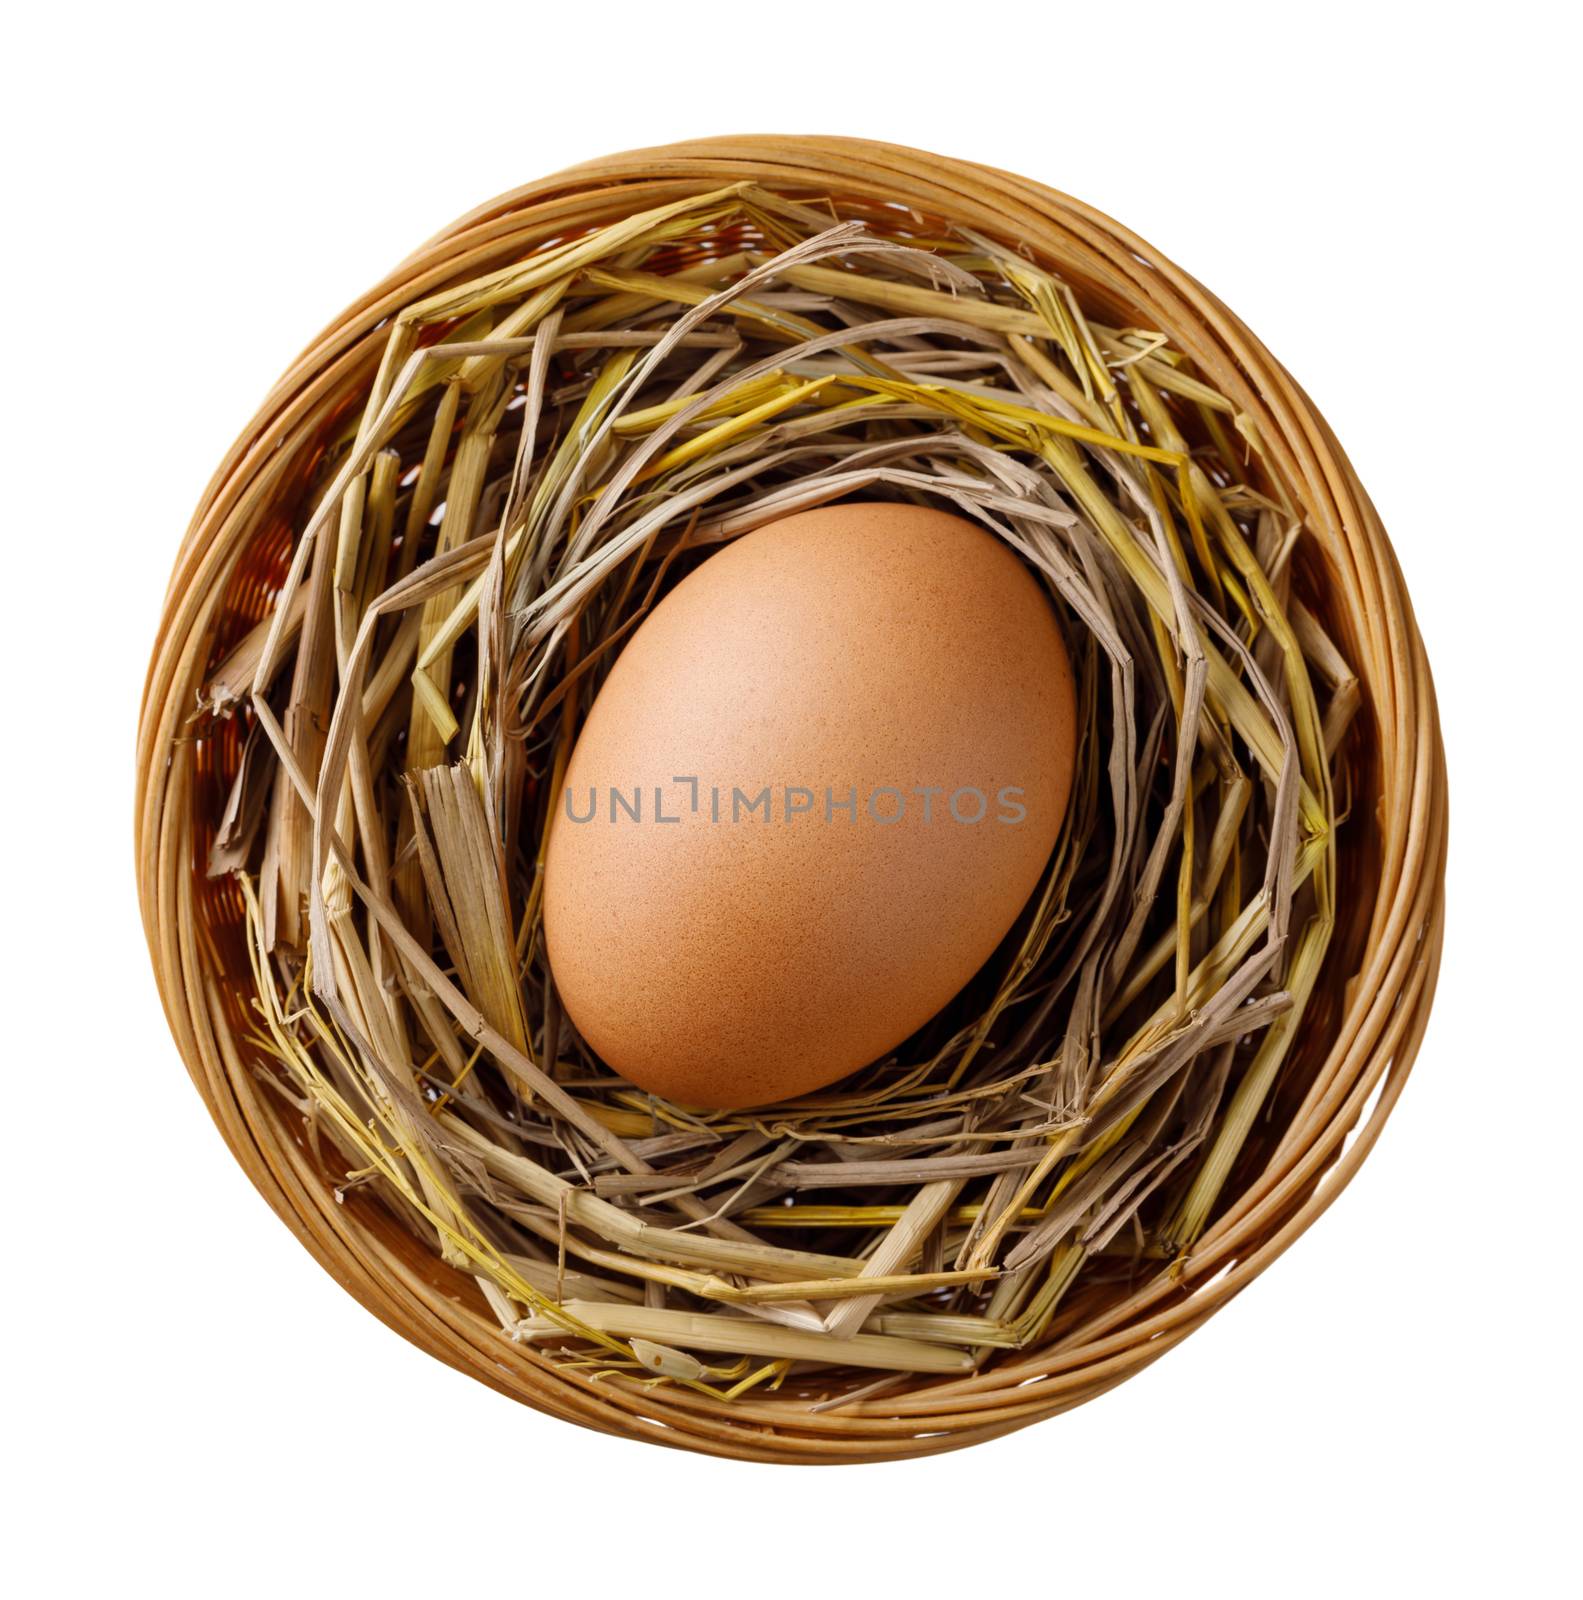 Chicken or hen egg on straw in wicker basket isolated on white background